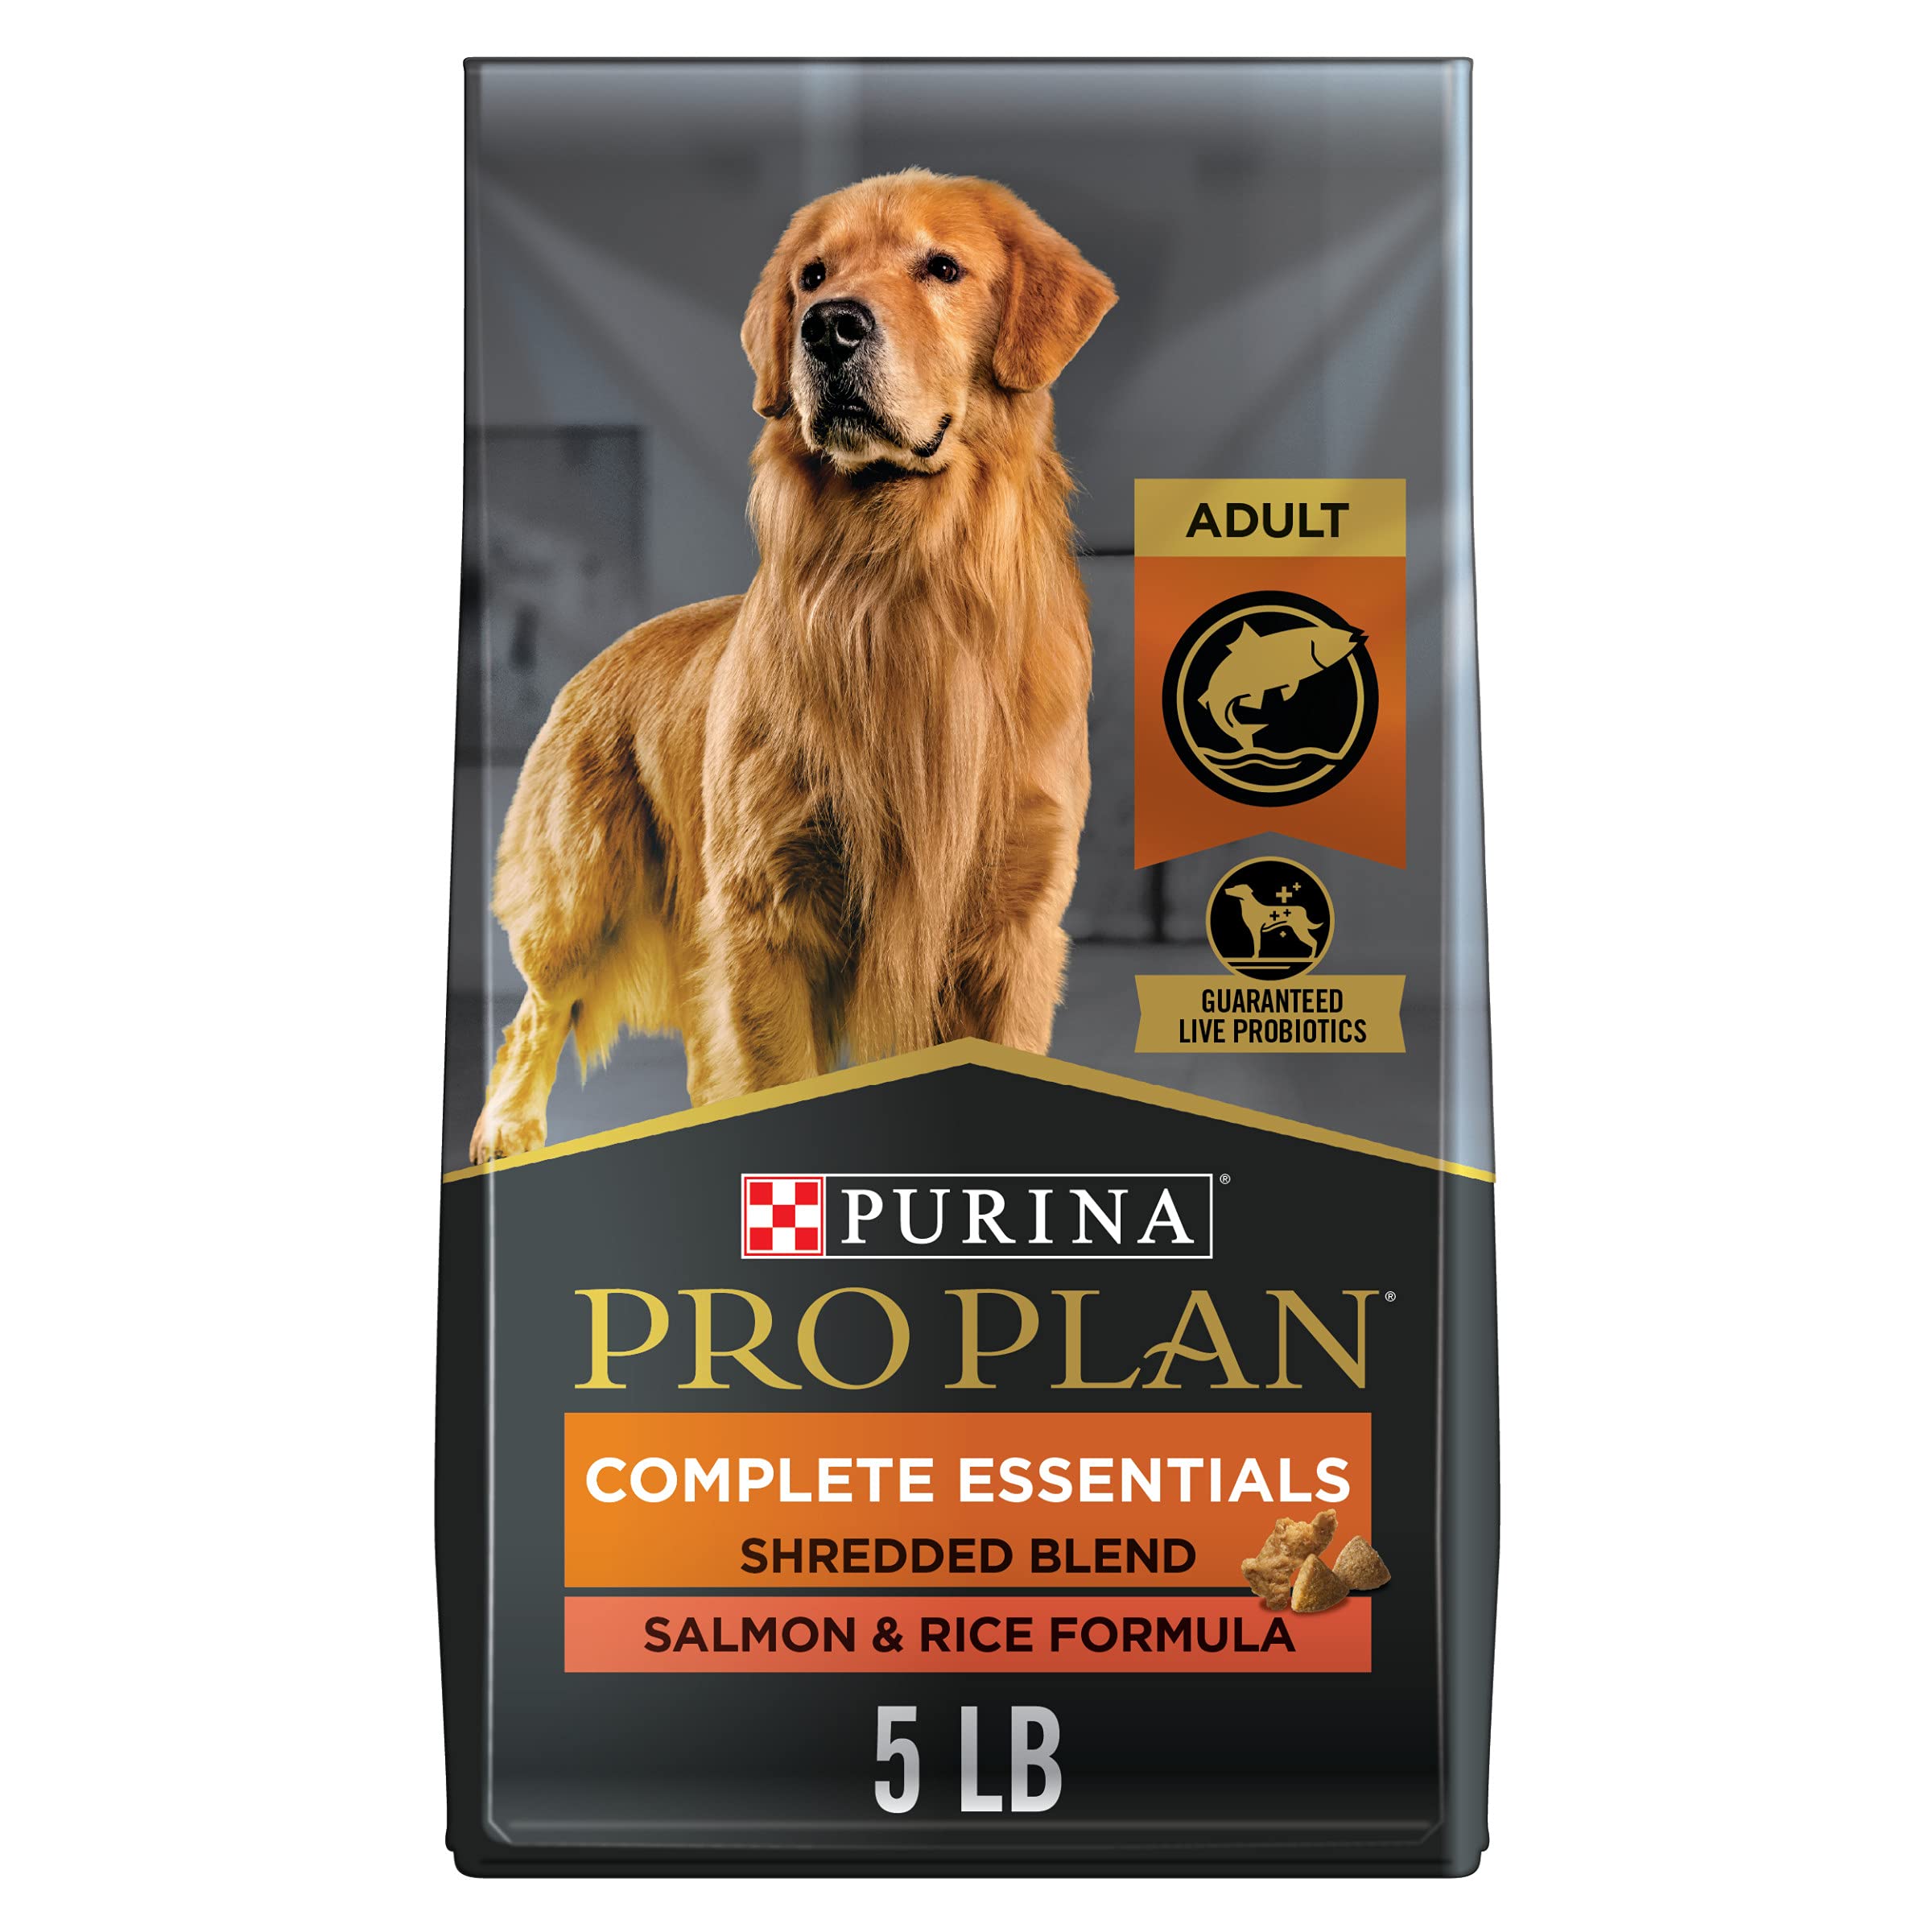 Purina High Protein Dog Food with Probiotics for Dogs, ...